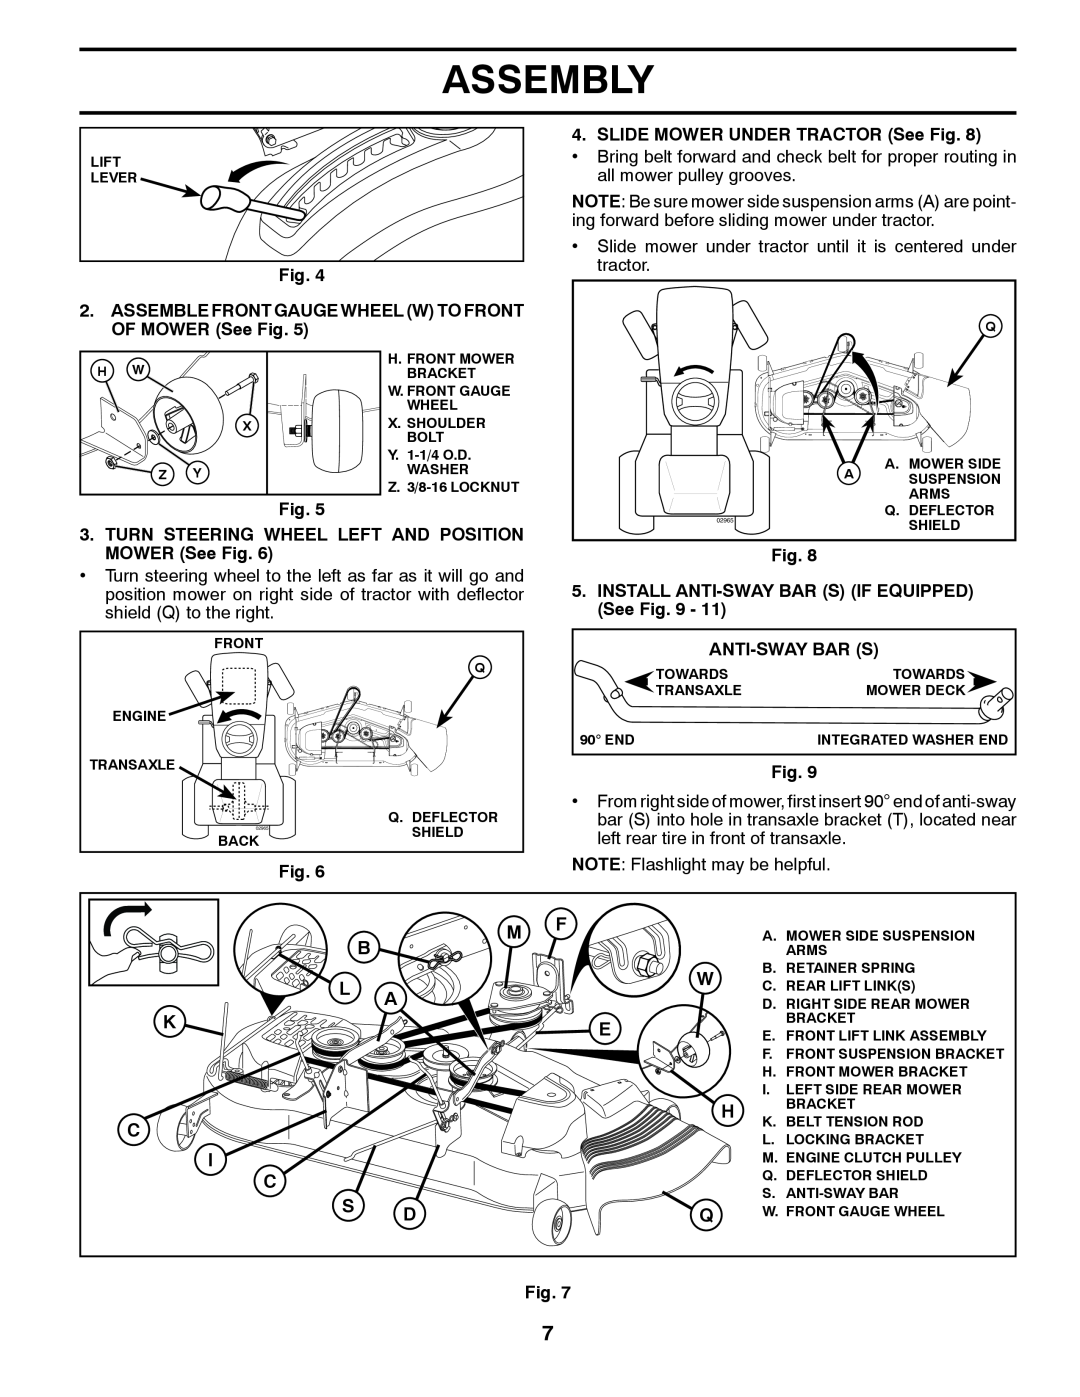 Poulan 96042011001, 532 43 34-32 manual Assembly, B L A K C I C S D, SLIDE MOWER UNDER TRACTOR See Fig, Anti-Swaybar S 